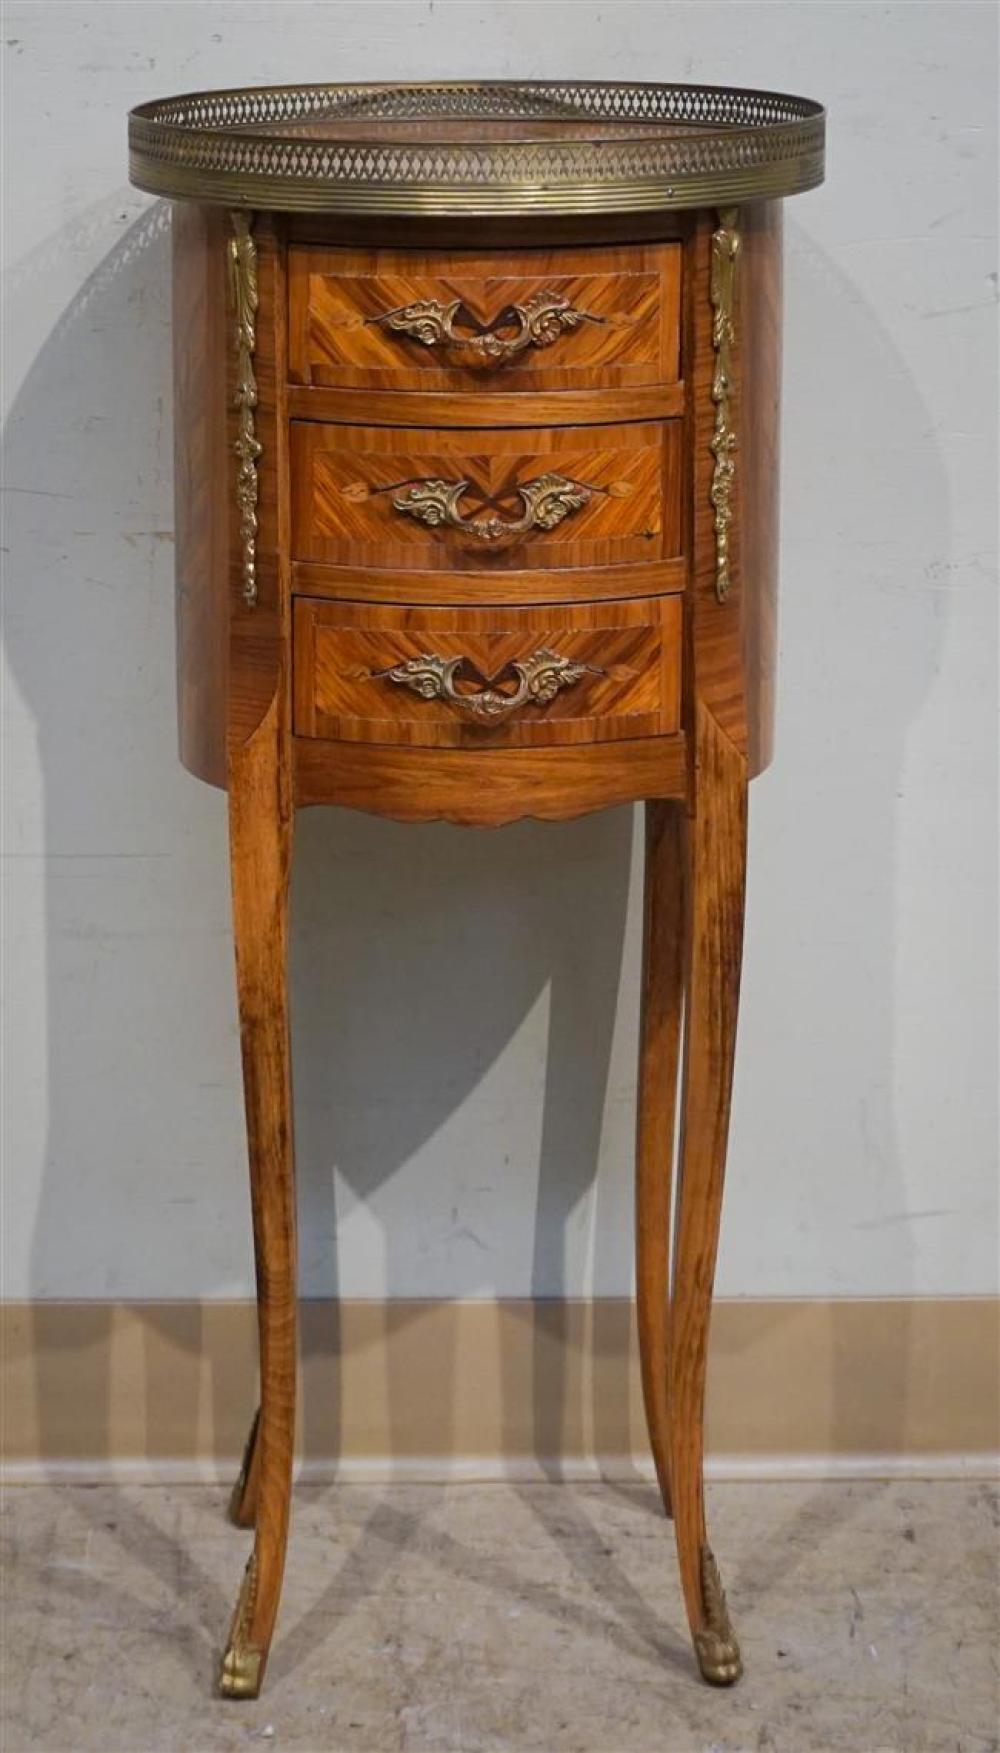 LOUIS XV STYLE MARQUETRY KINGWOOD